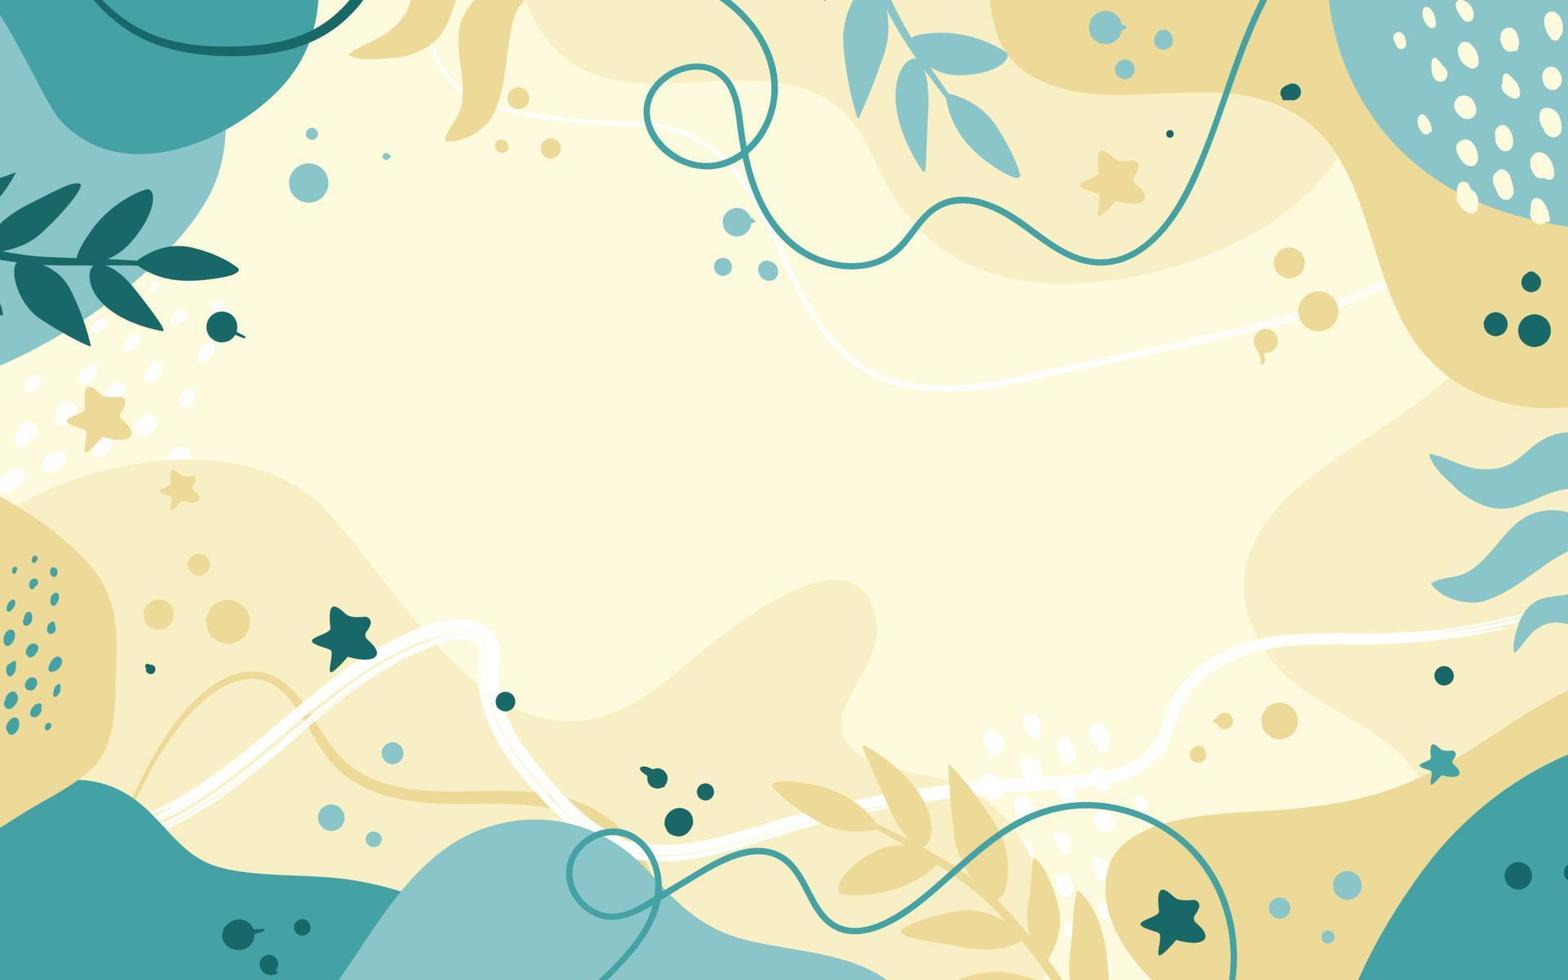 Hand drawn flat design abstract doodle background vector